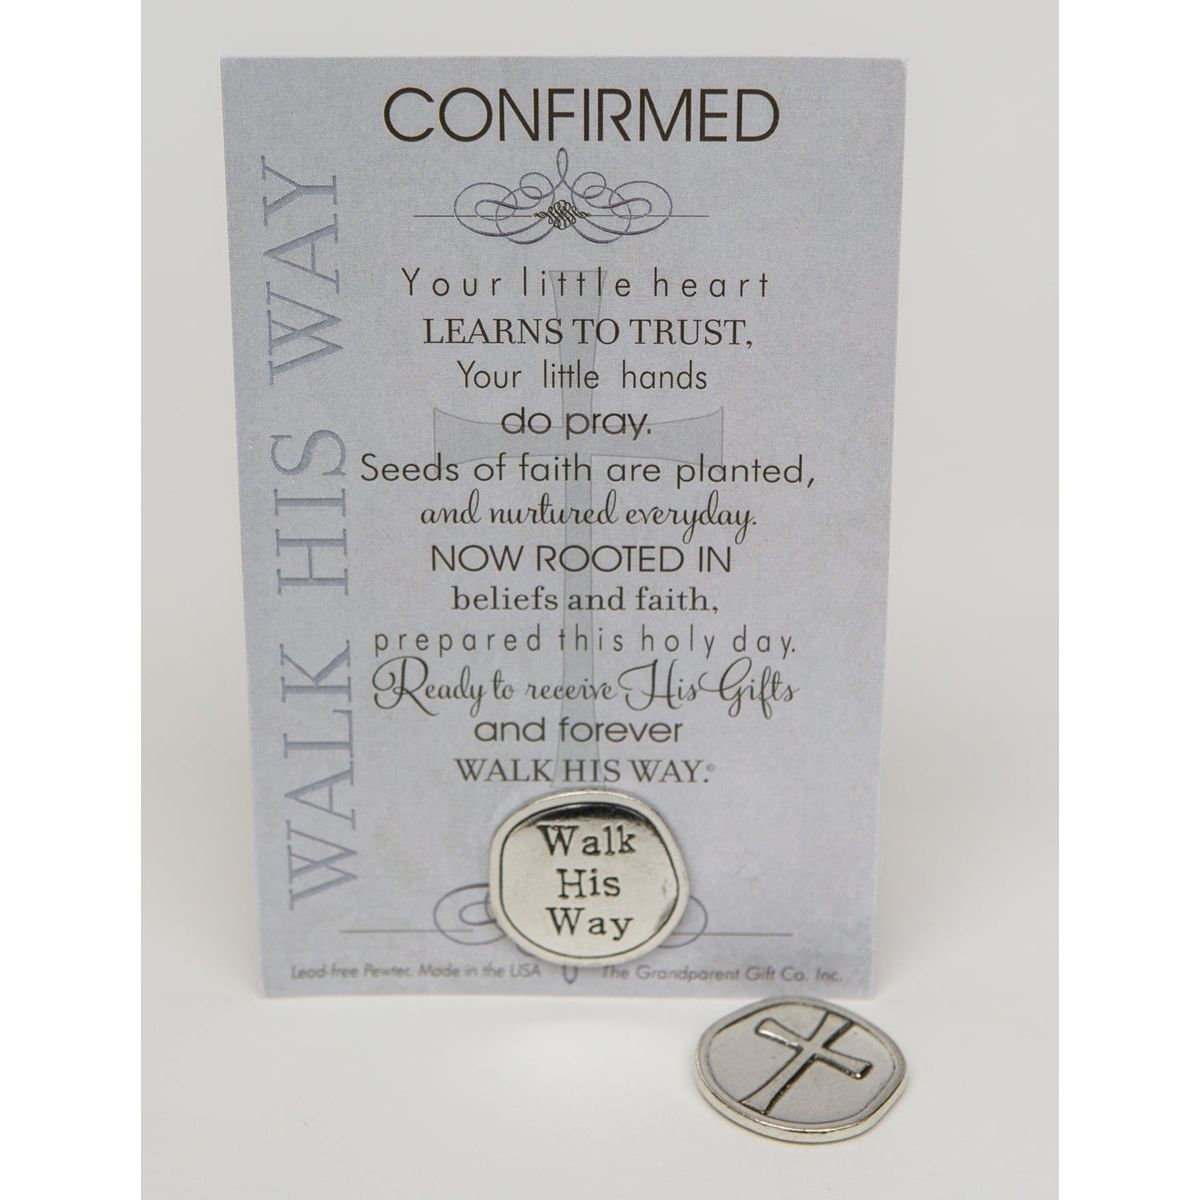 Confirmation Gift: Handmade pewter coin with &quot;Walk His Way&quot; on one side and an cross on the other, packaged in a clear bag with &quot;Confirmed&quot; poem.